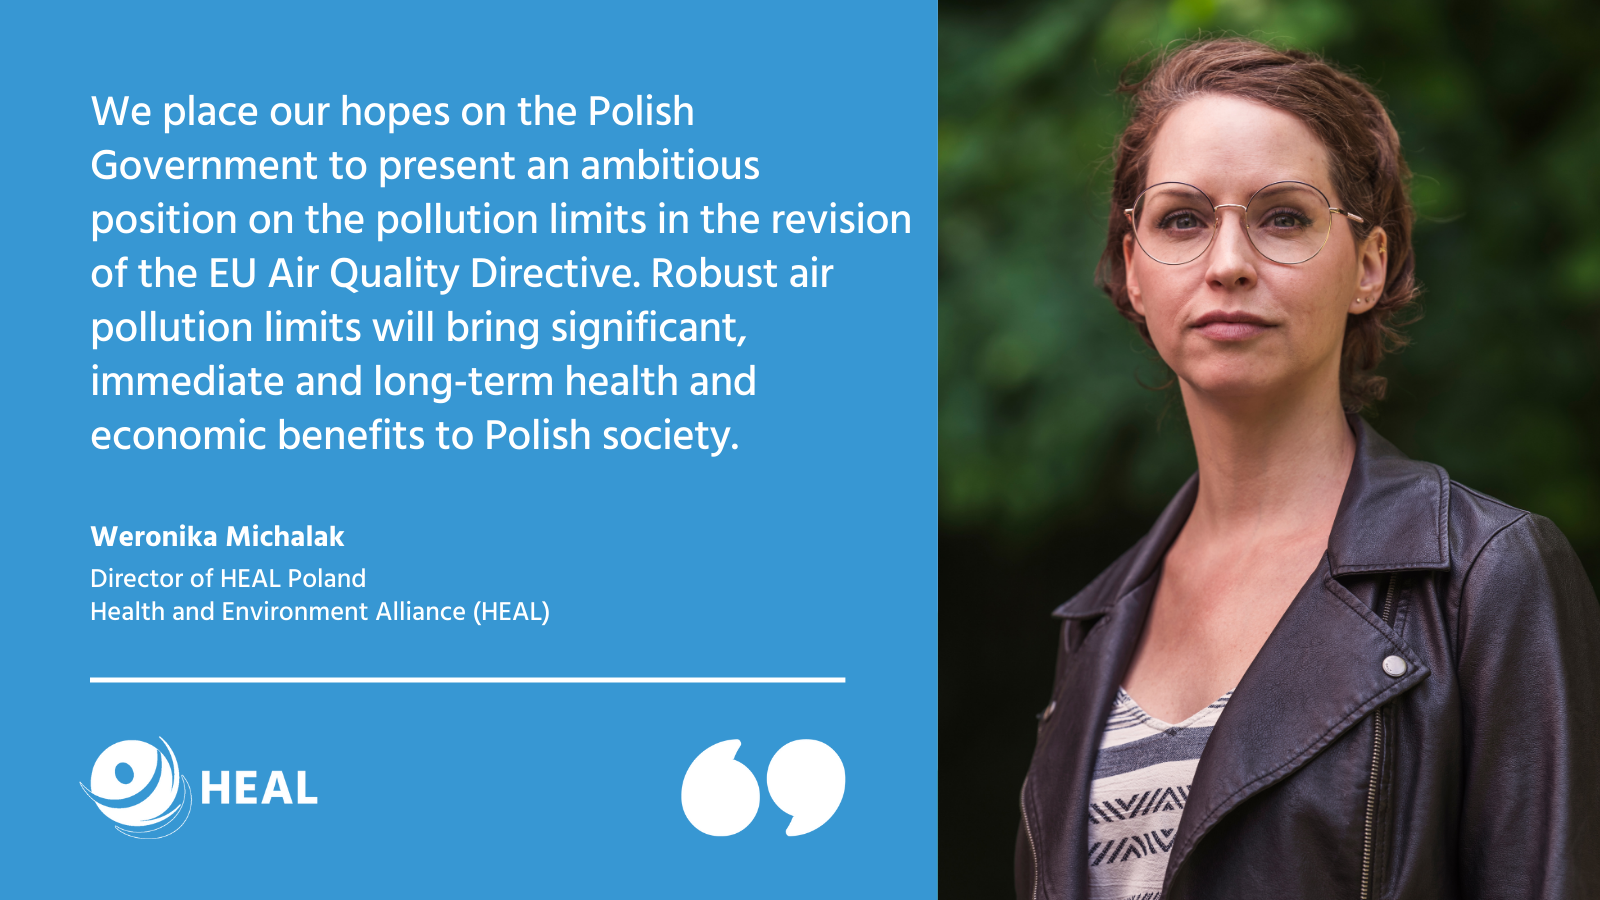 The Polish government is in a key position to ensure an ambitious EU Air Quality Directive